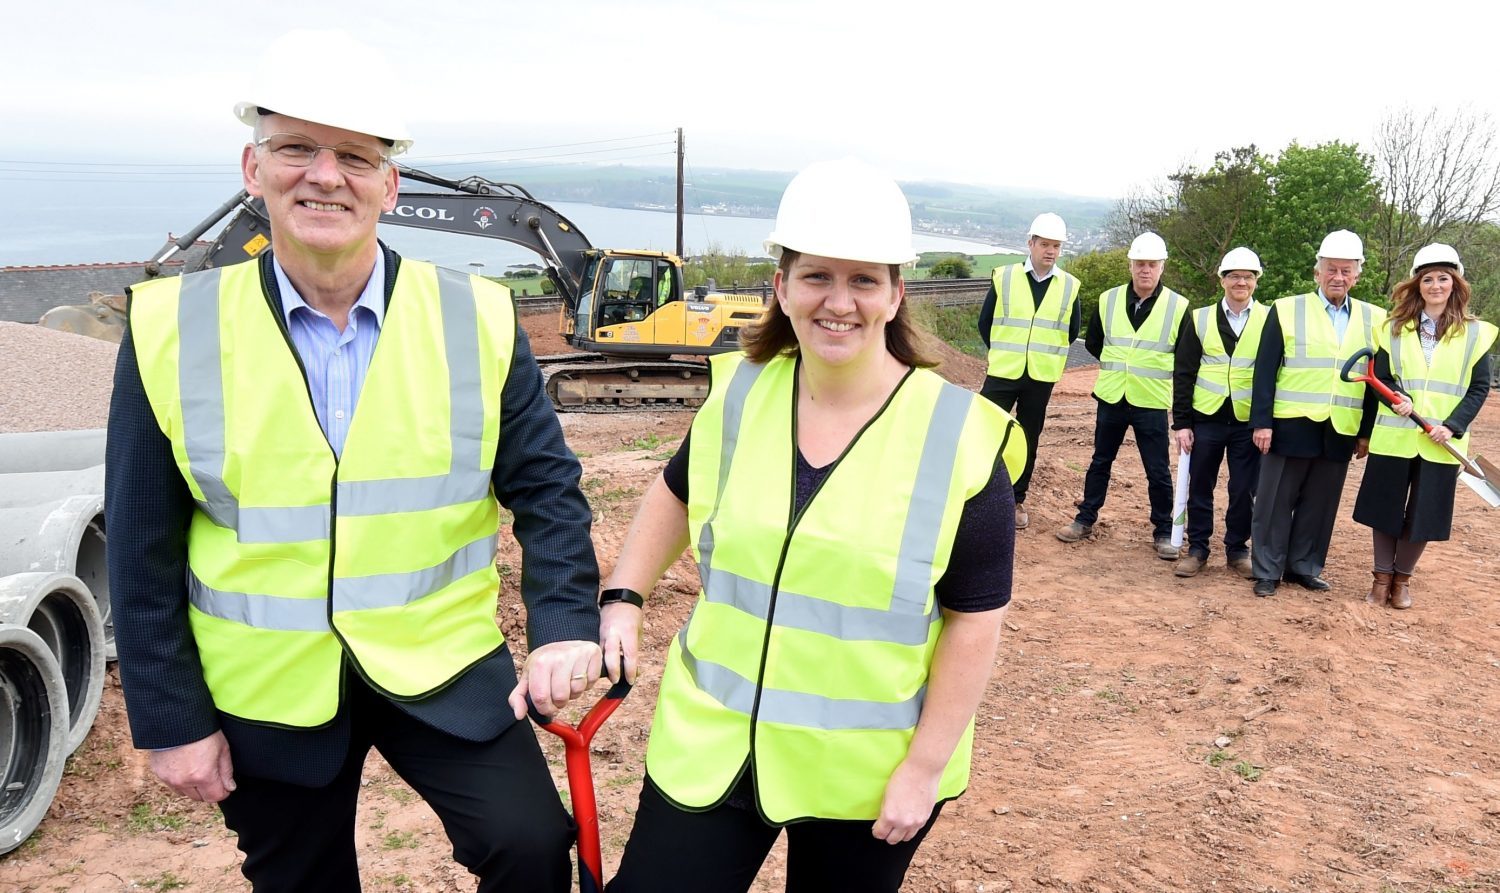 Robert and Kelly McAlpine at the ground-breaking ceremony